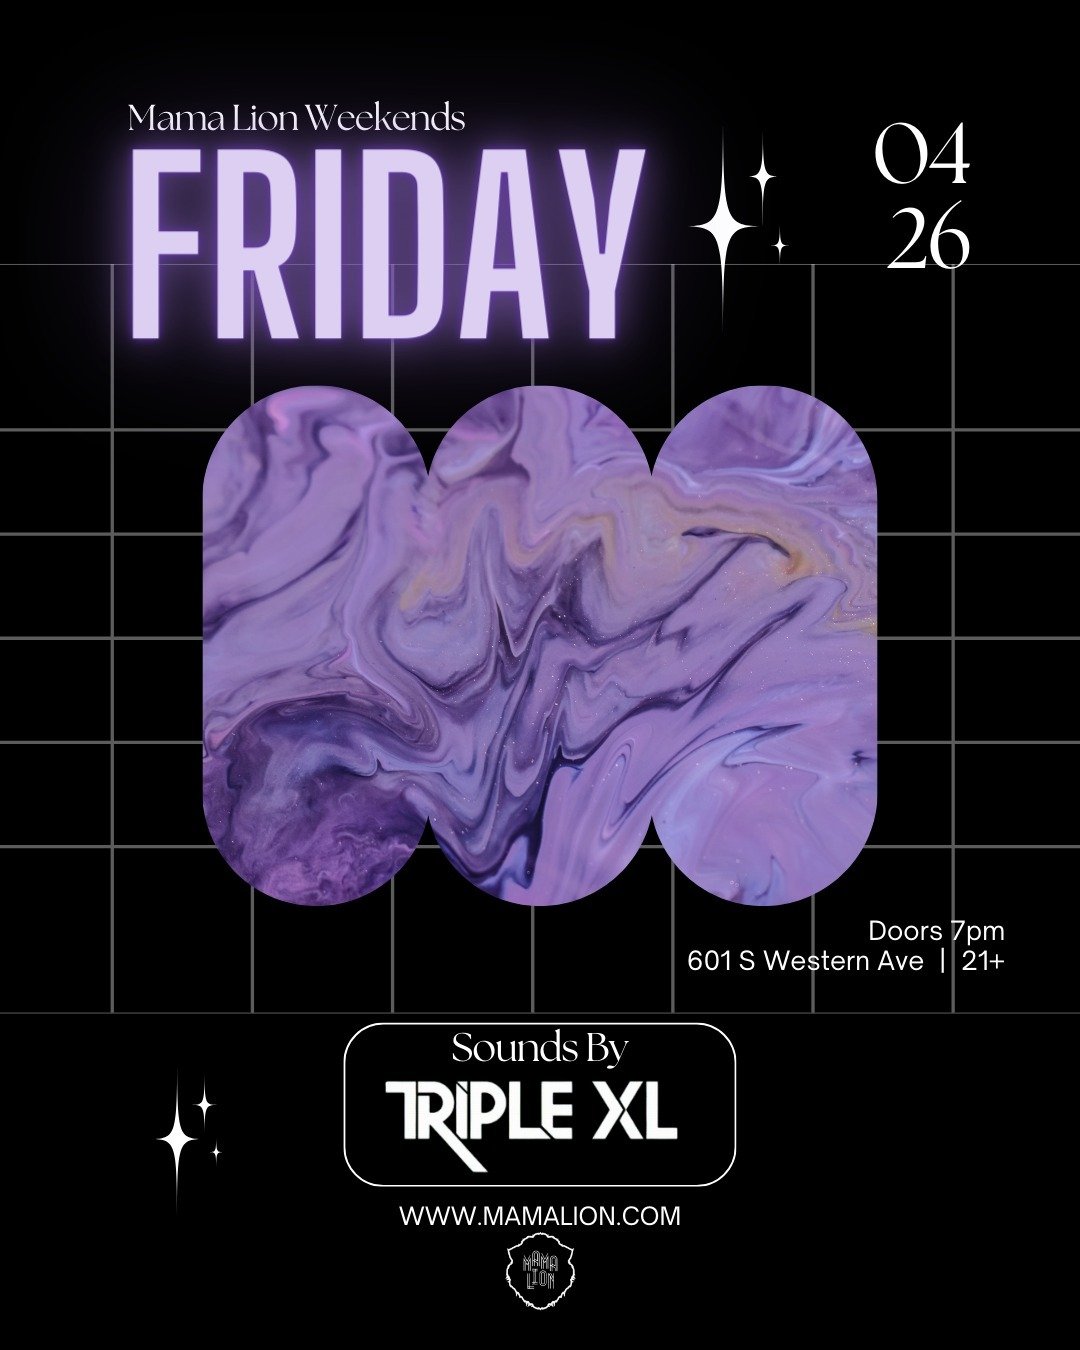 Something to look forward to this week 👀📅
Join us this Friday at #mamalion with Sounds by @djtriplexl ✨

Doors 7pm
www.mamalion.com

#lanightlife #koreatownla #laevents